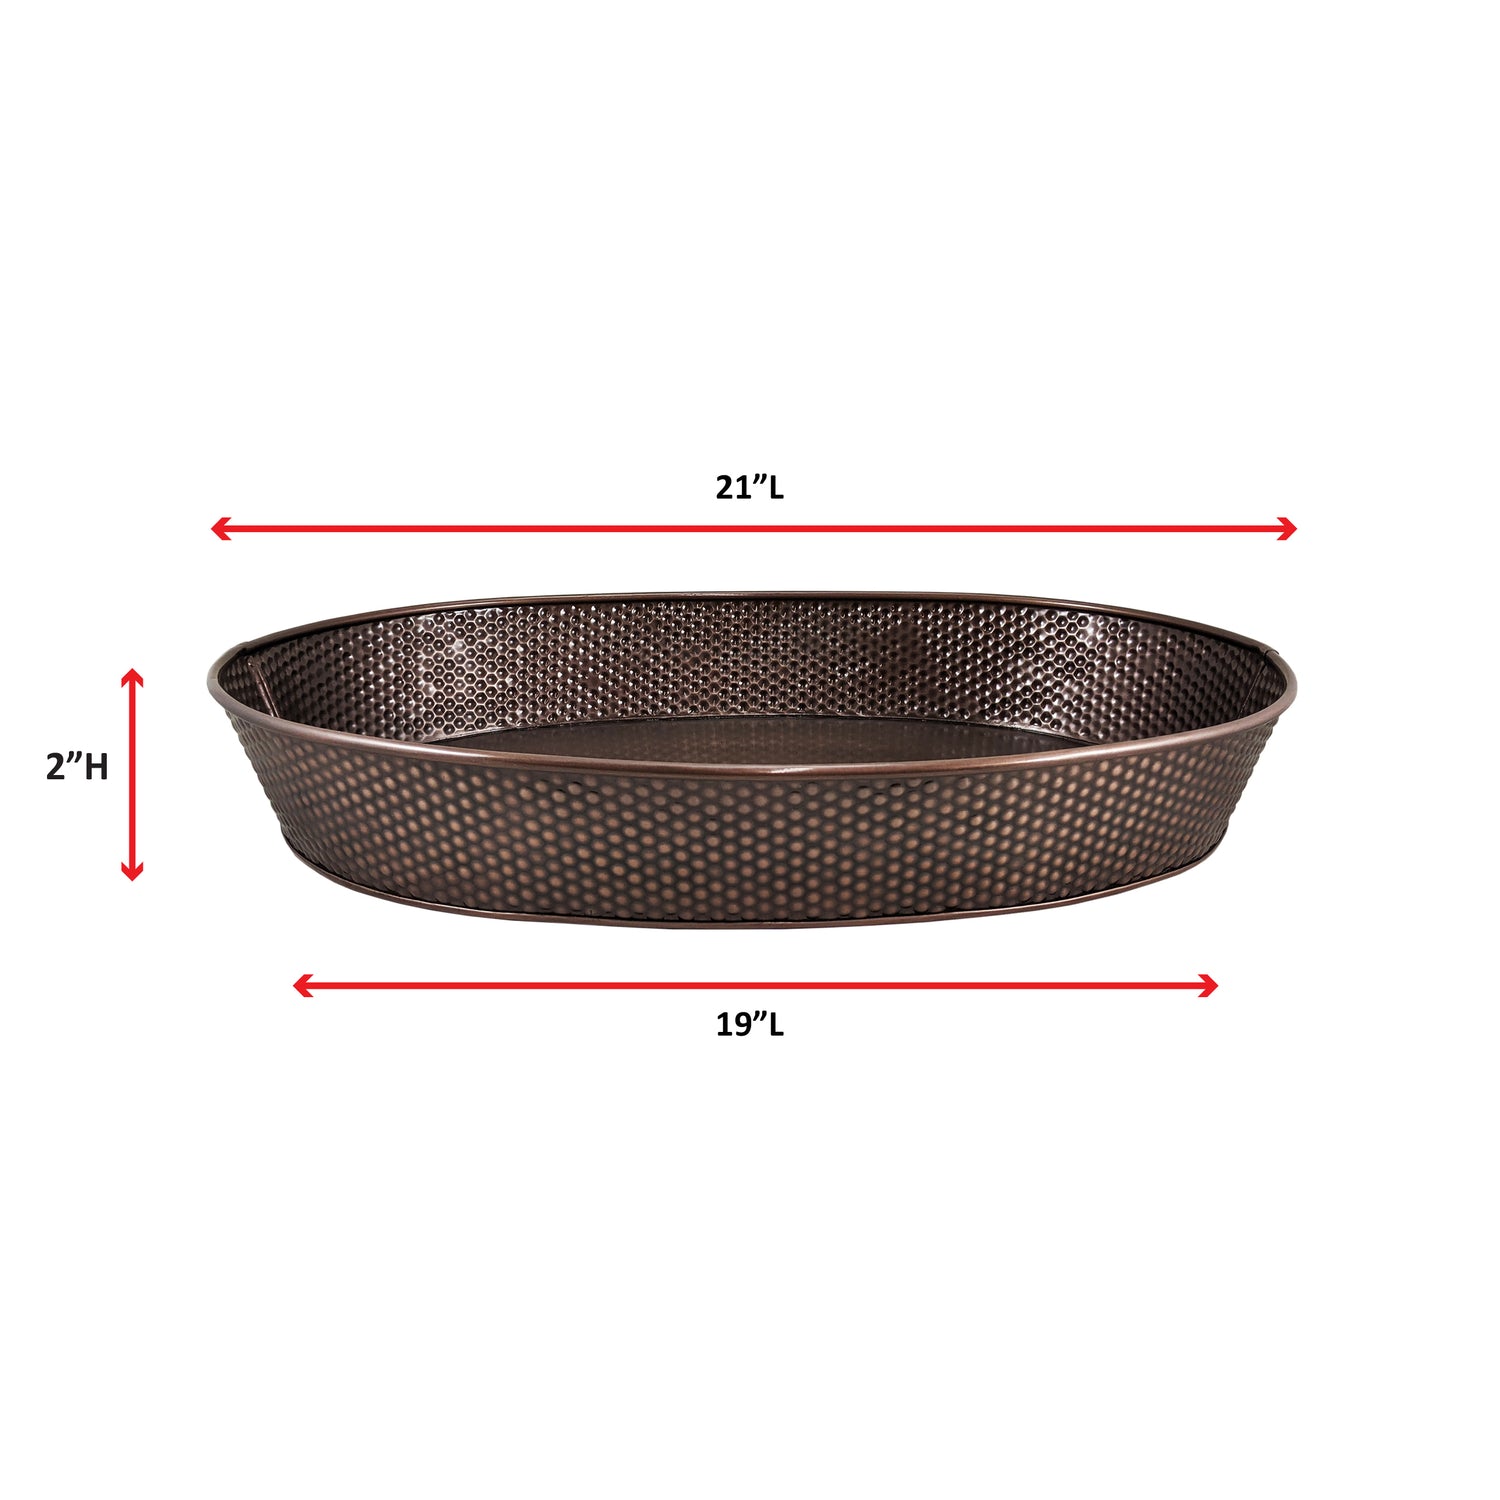 Metal serving tray to serve drinks and snacks at a party with oval shape, copper color, and easy to clean high glossy finish.